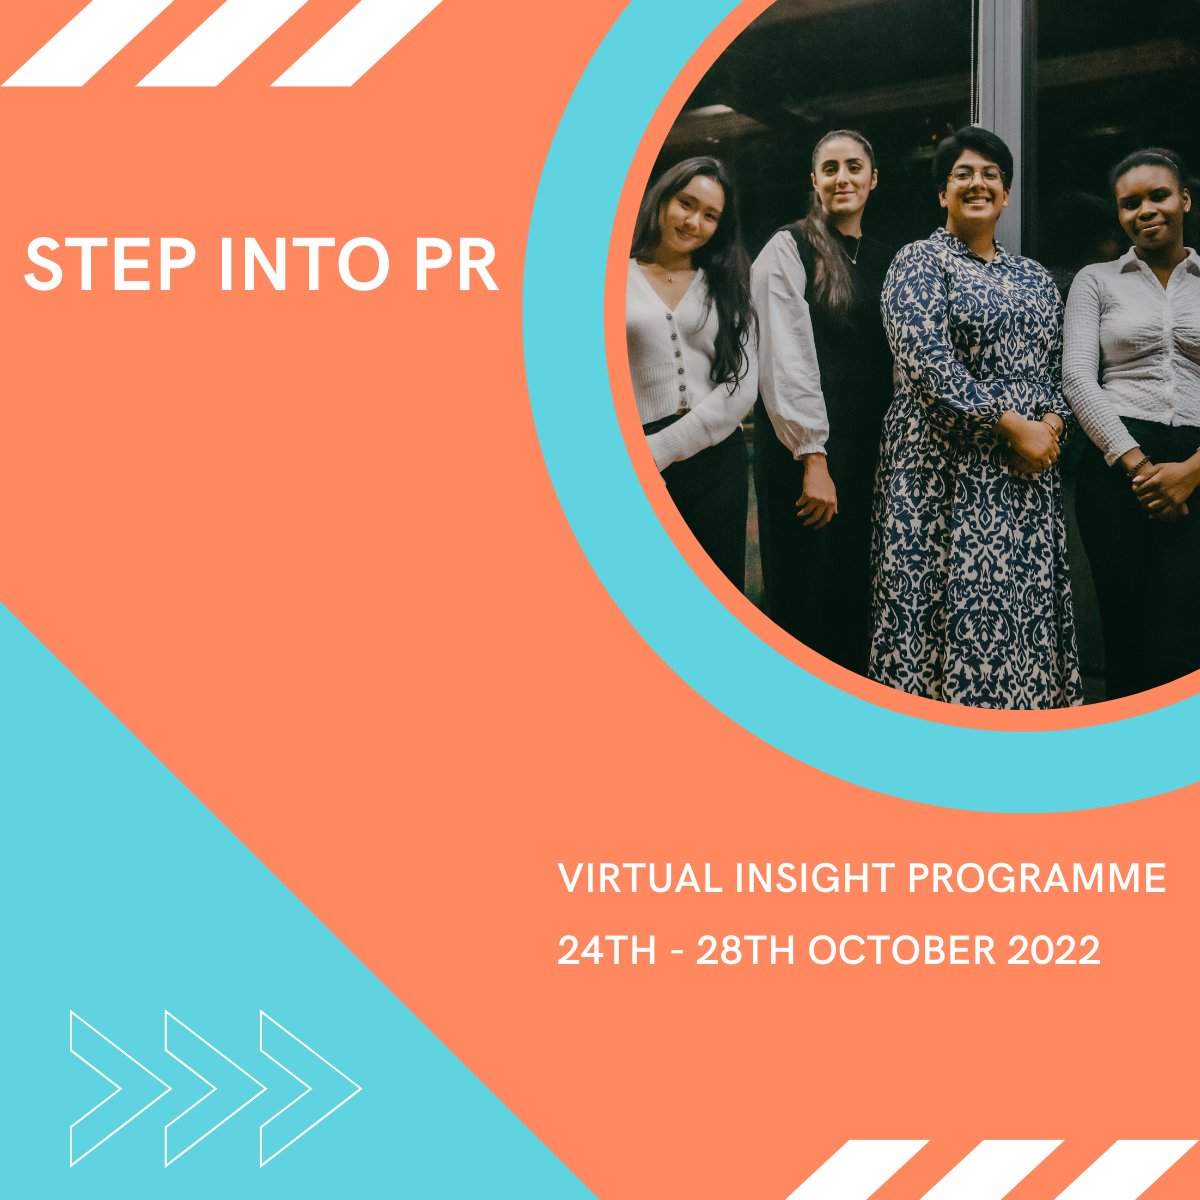 Calling Year 12's and Year 13's. If you are interested in exploring what a career in PR looks like, sign up to our new virtual insight programme - Step into PR. Apply now here taylorbennettfoundation.org/forms/step-int… #workexperience #insightweek #careertalks #careertips #Year12 #Year13